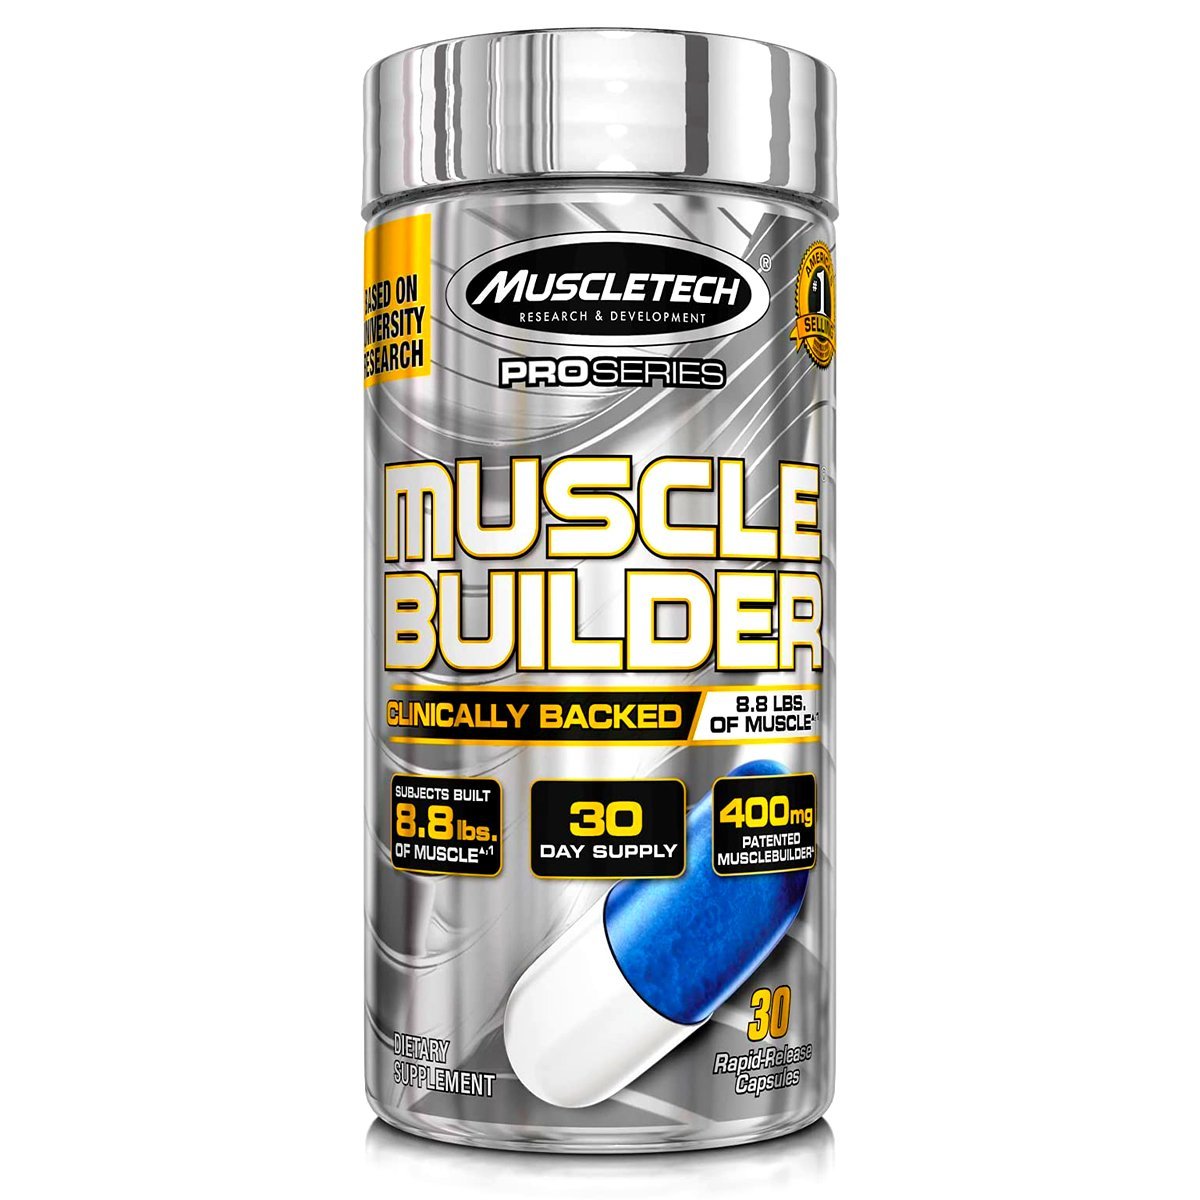 Muscletech Muscle Builder - 30 Capsules